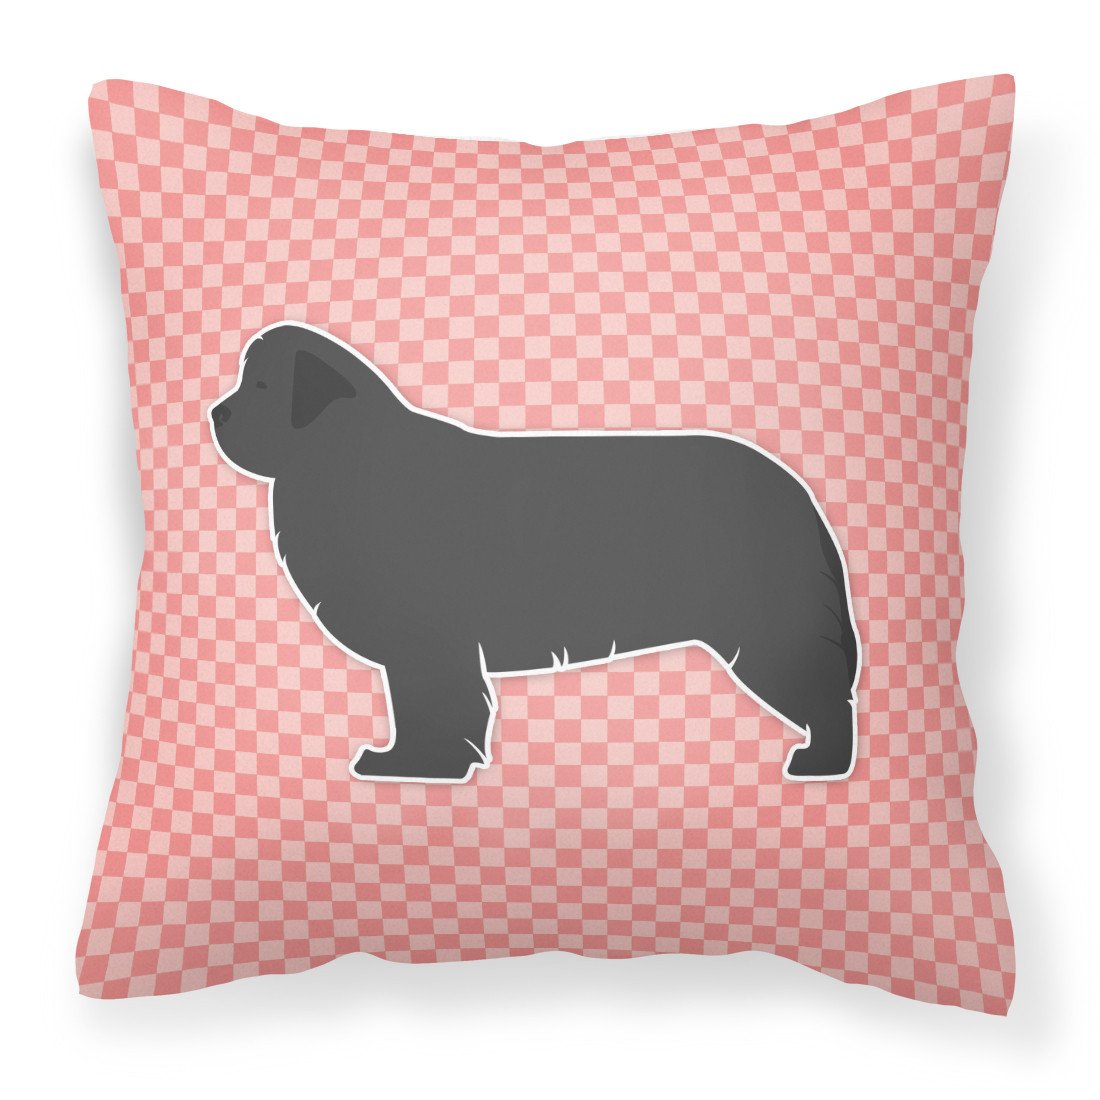 Newfoundland Checkerboard Pink Fabric Decorative Pillow BB3664PW1818 by Caroline's Treasures